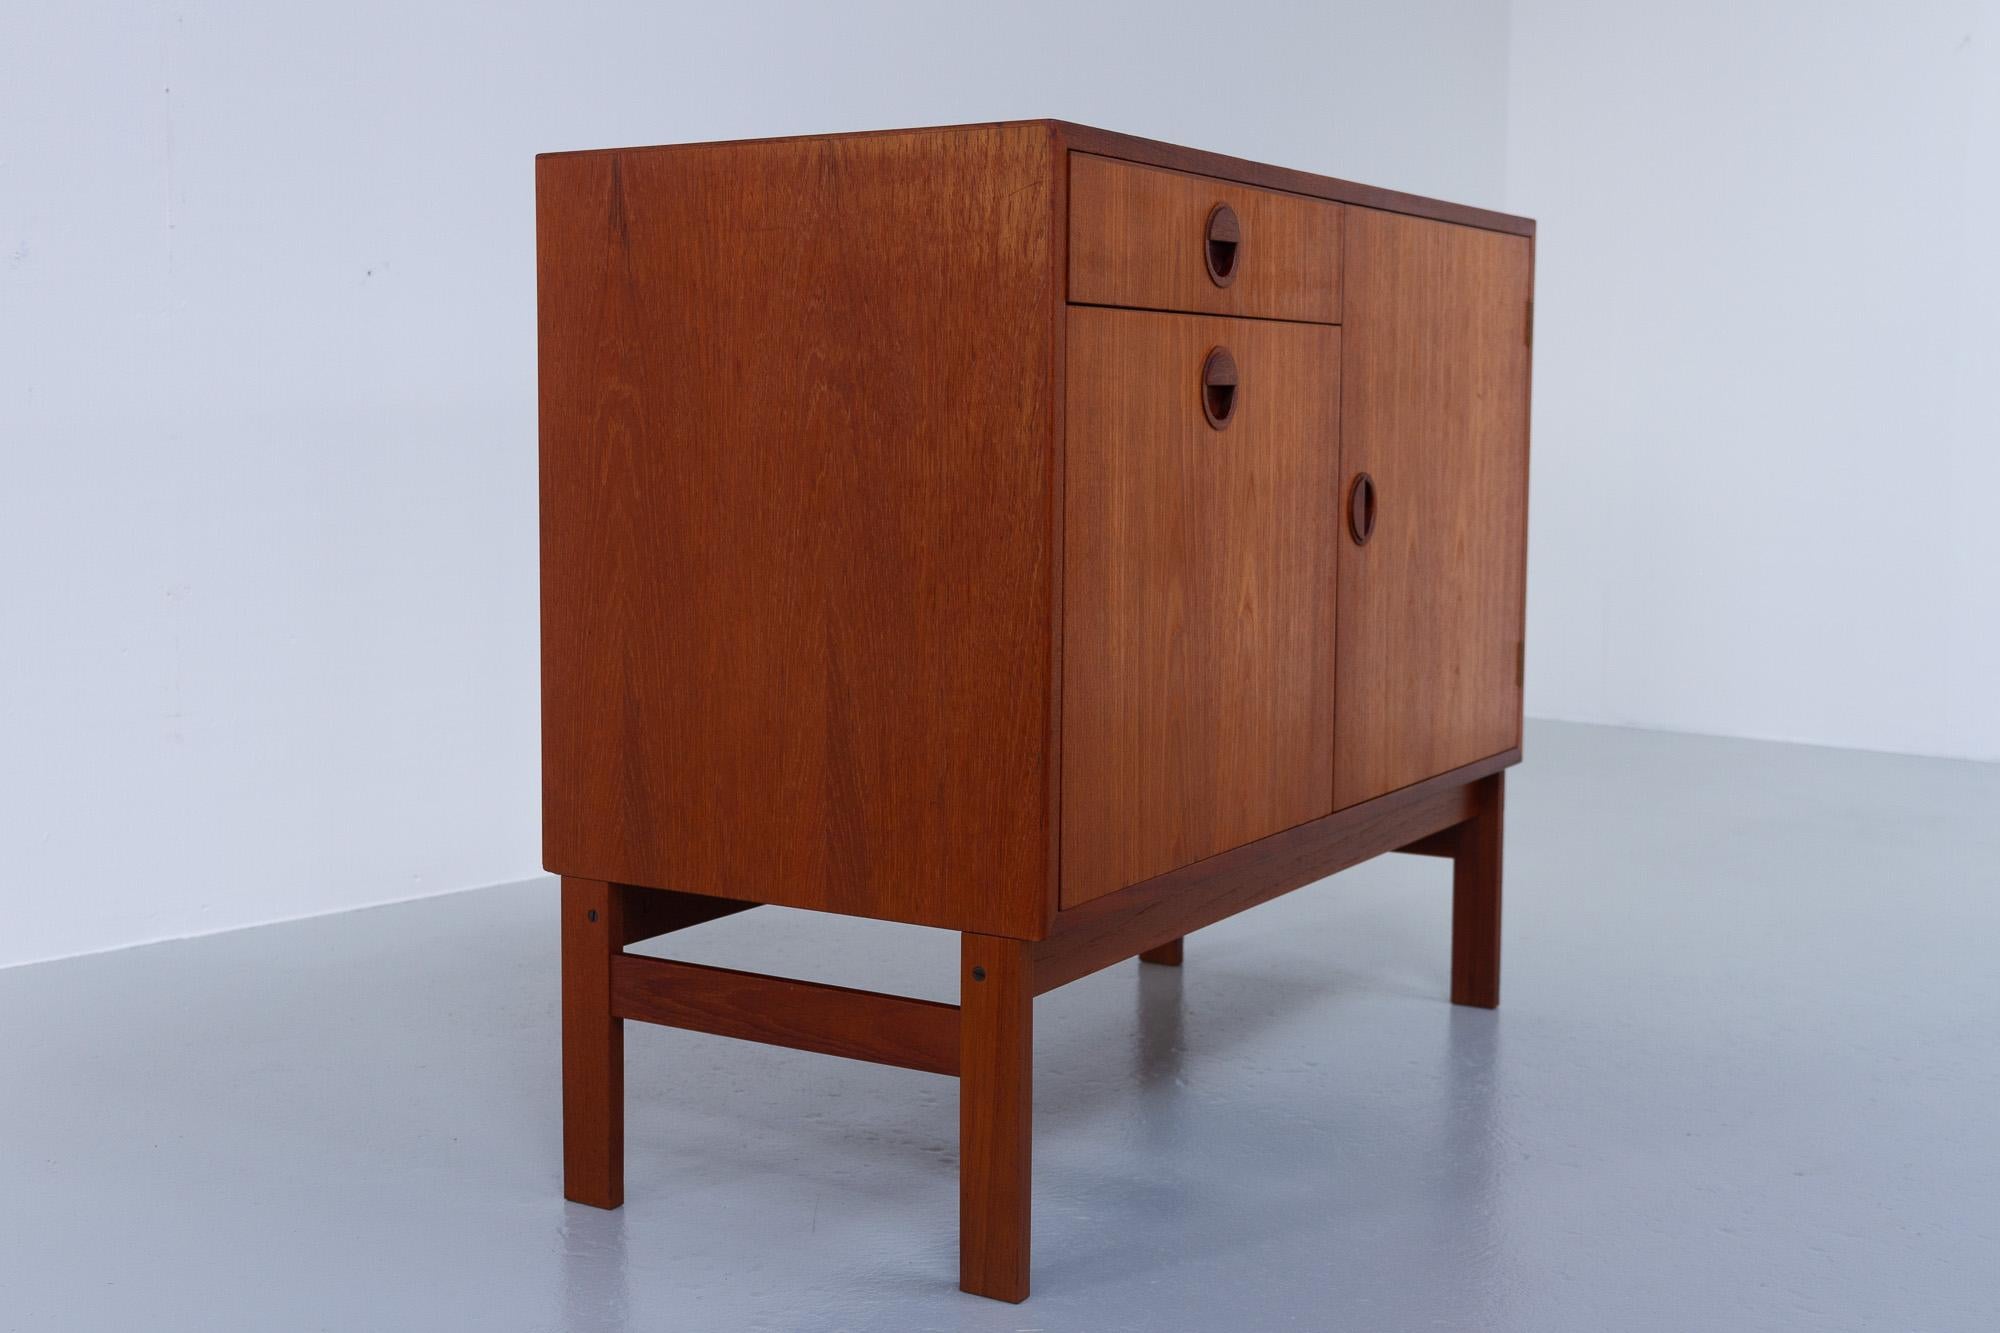 Vintage Danish Teak Sewing Cabinet by HG Furniture, 1960s.

This midcentury Scandinavian sideboard was designed by Danish architects Rud Thygesen and Johnny Sørensen, manufactured by HG Furniture (Hansen & Guldborg) Denmark.

One compartment